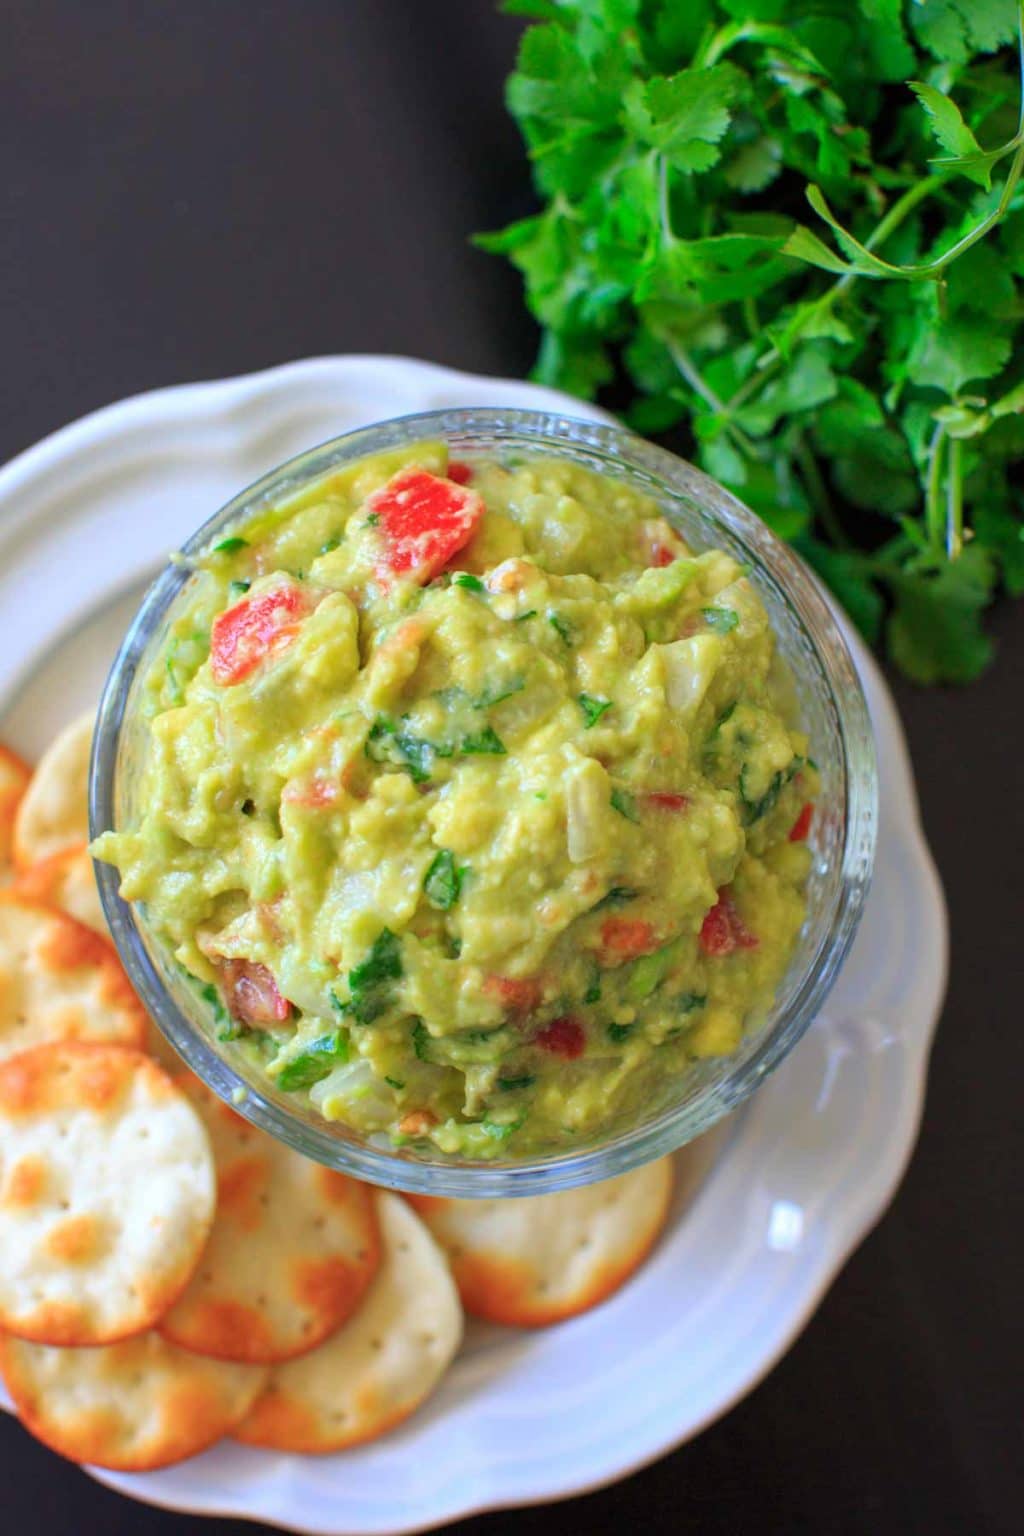 The BEST EVER guacamole recipe that's a little spicy, full of flavor and naturally vegan and gluten-free. Includes tips on how to make it your own if your taste buds can't handle cilantro or spicy.